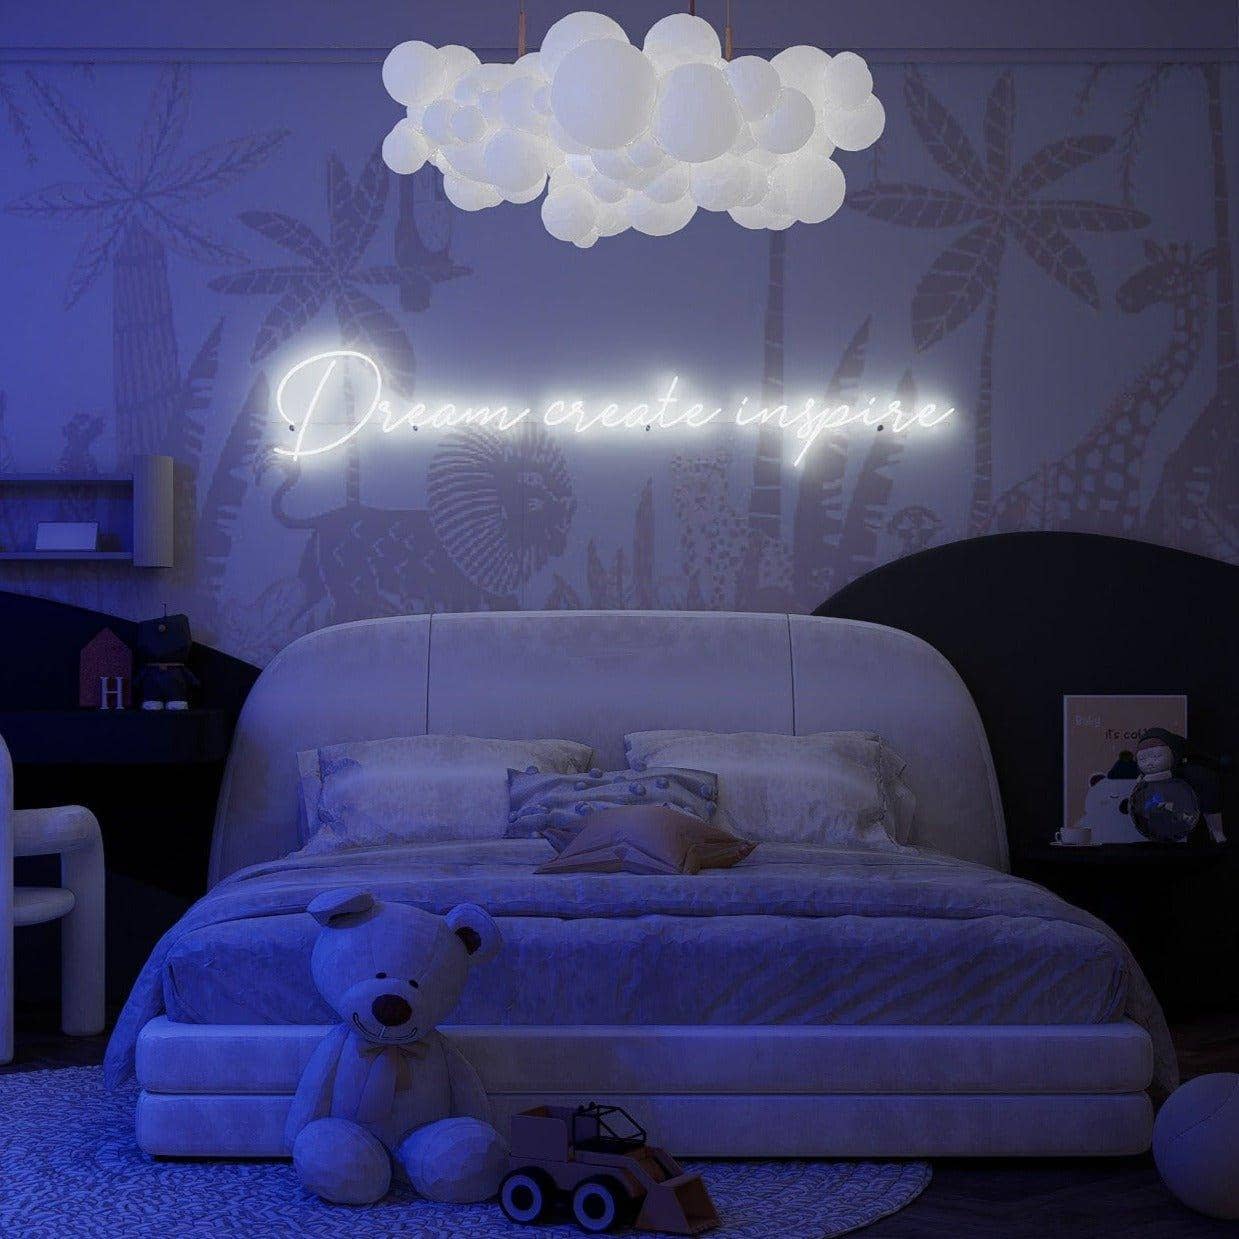 white-neon-lights-are-lit-up-and-displayed-in-the-bedroom-at-night-dream-creat-inspire